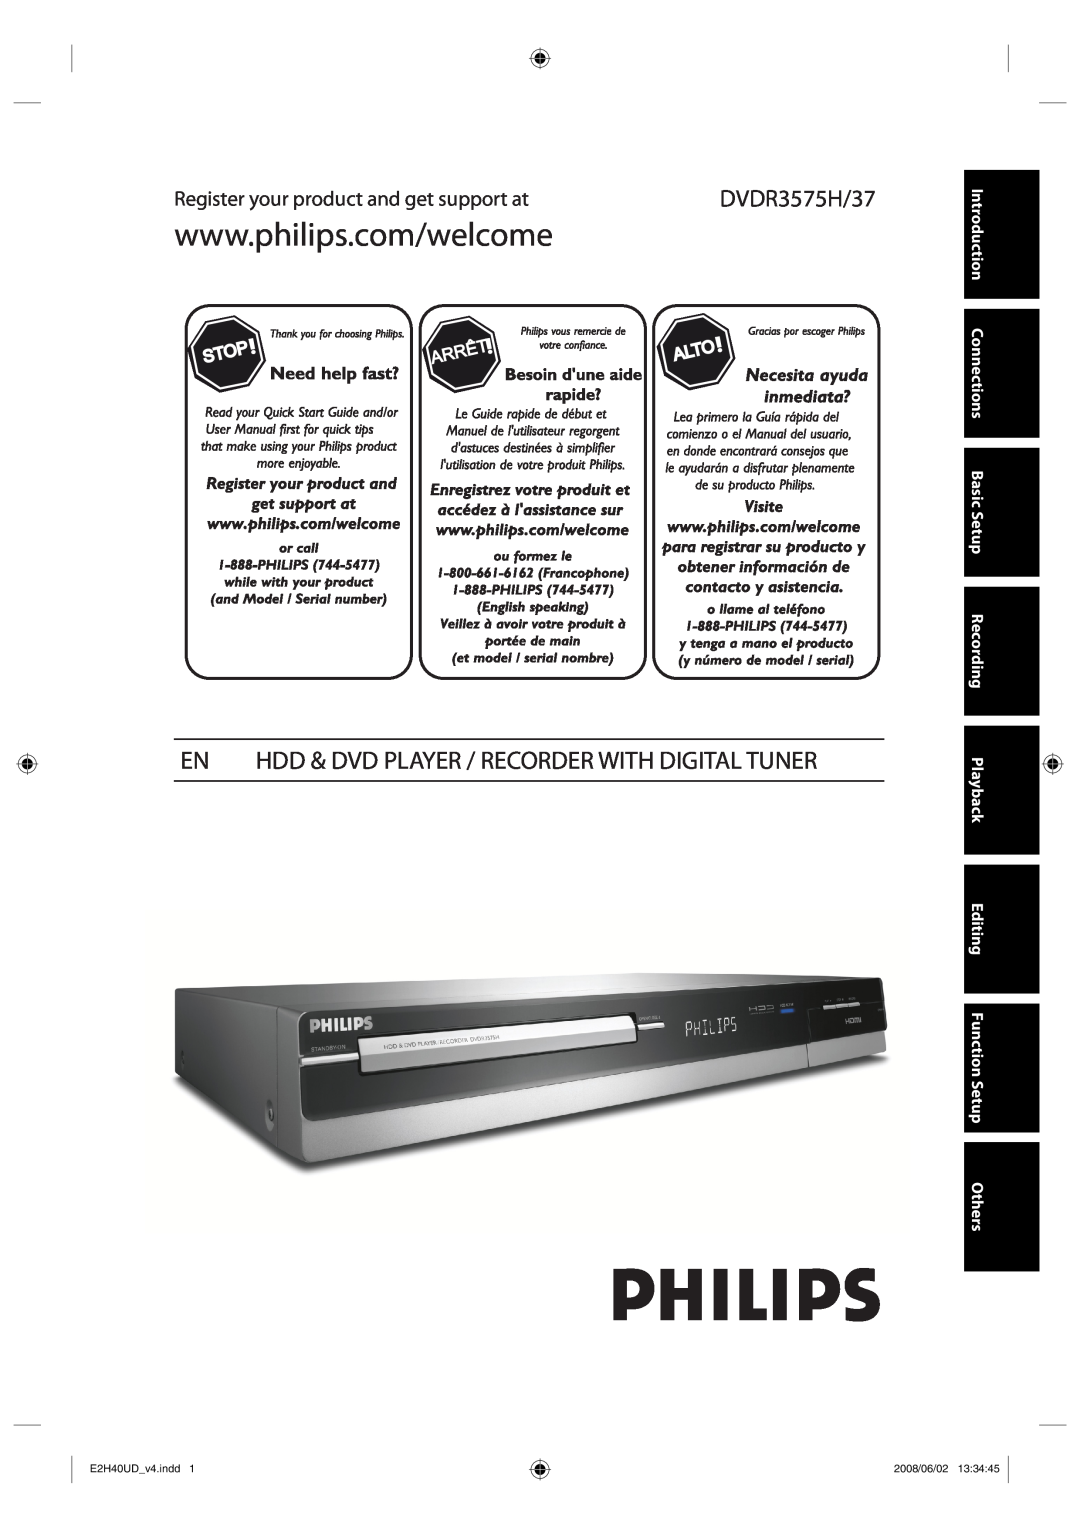 Philips DVDR3575H/37 manual En Hdd & Dvd Player / Recorder With Digital Tuner, Register your product and get support at 